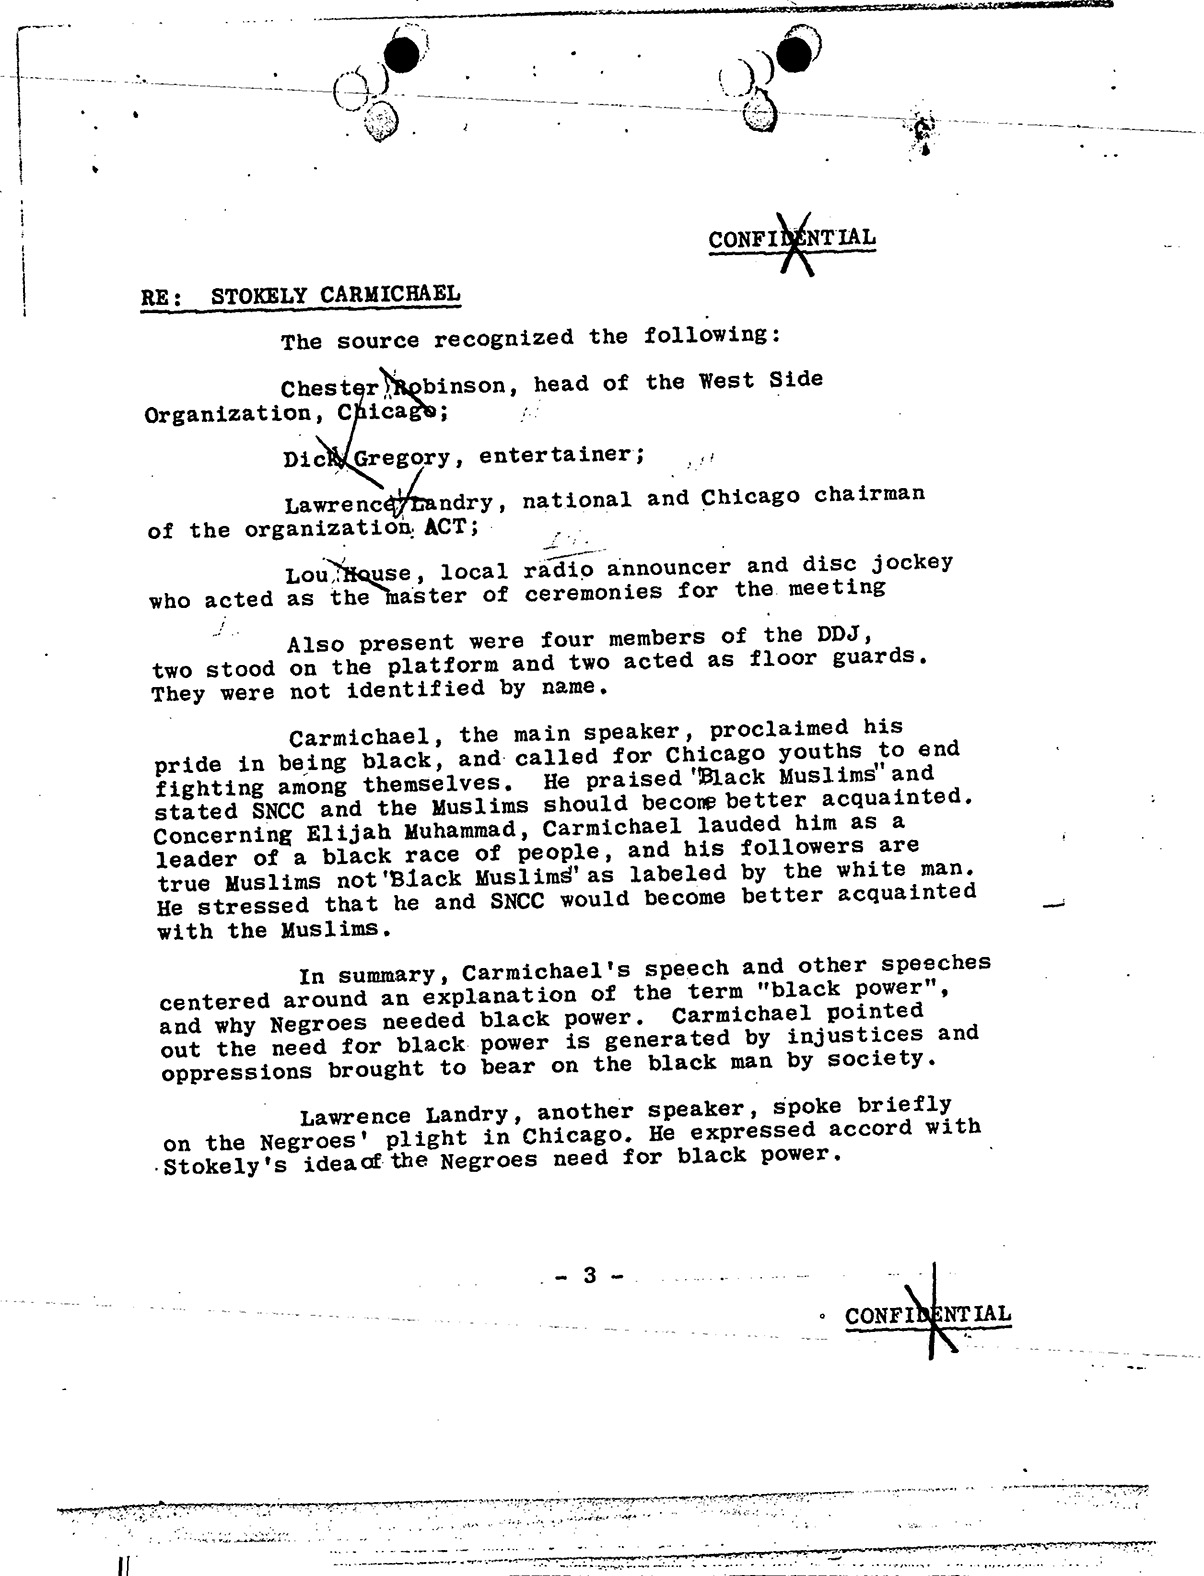 another page from FBI file on Carmichael